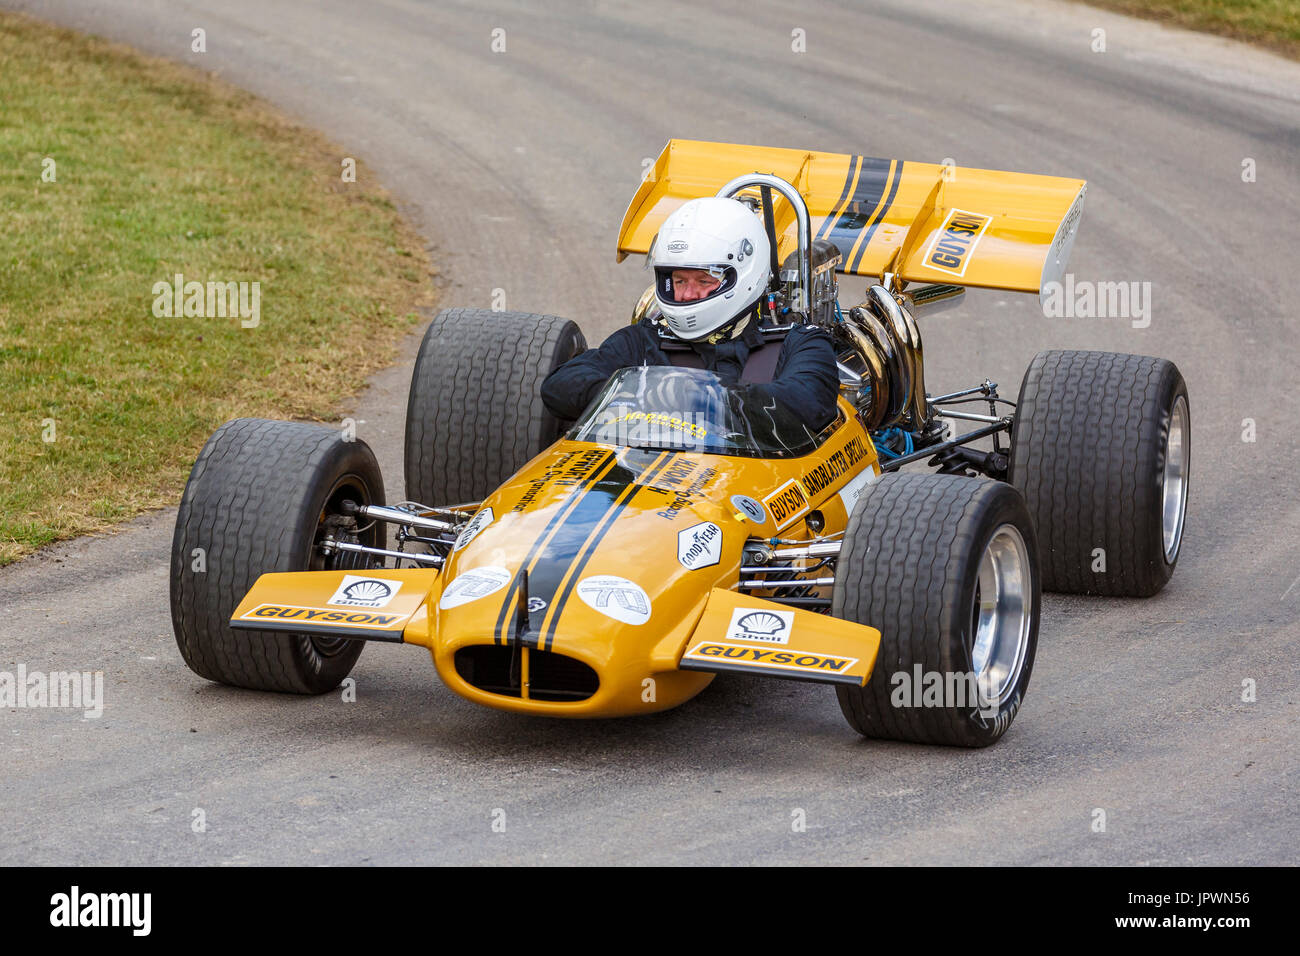 1969 Hepworth-Ferguson British Hillclimb Championship racer with driver Andrew Hepworth at the 2017 Goodwood Festival of Speed, Sussex, UK. Stock Photo